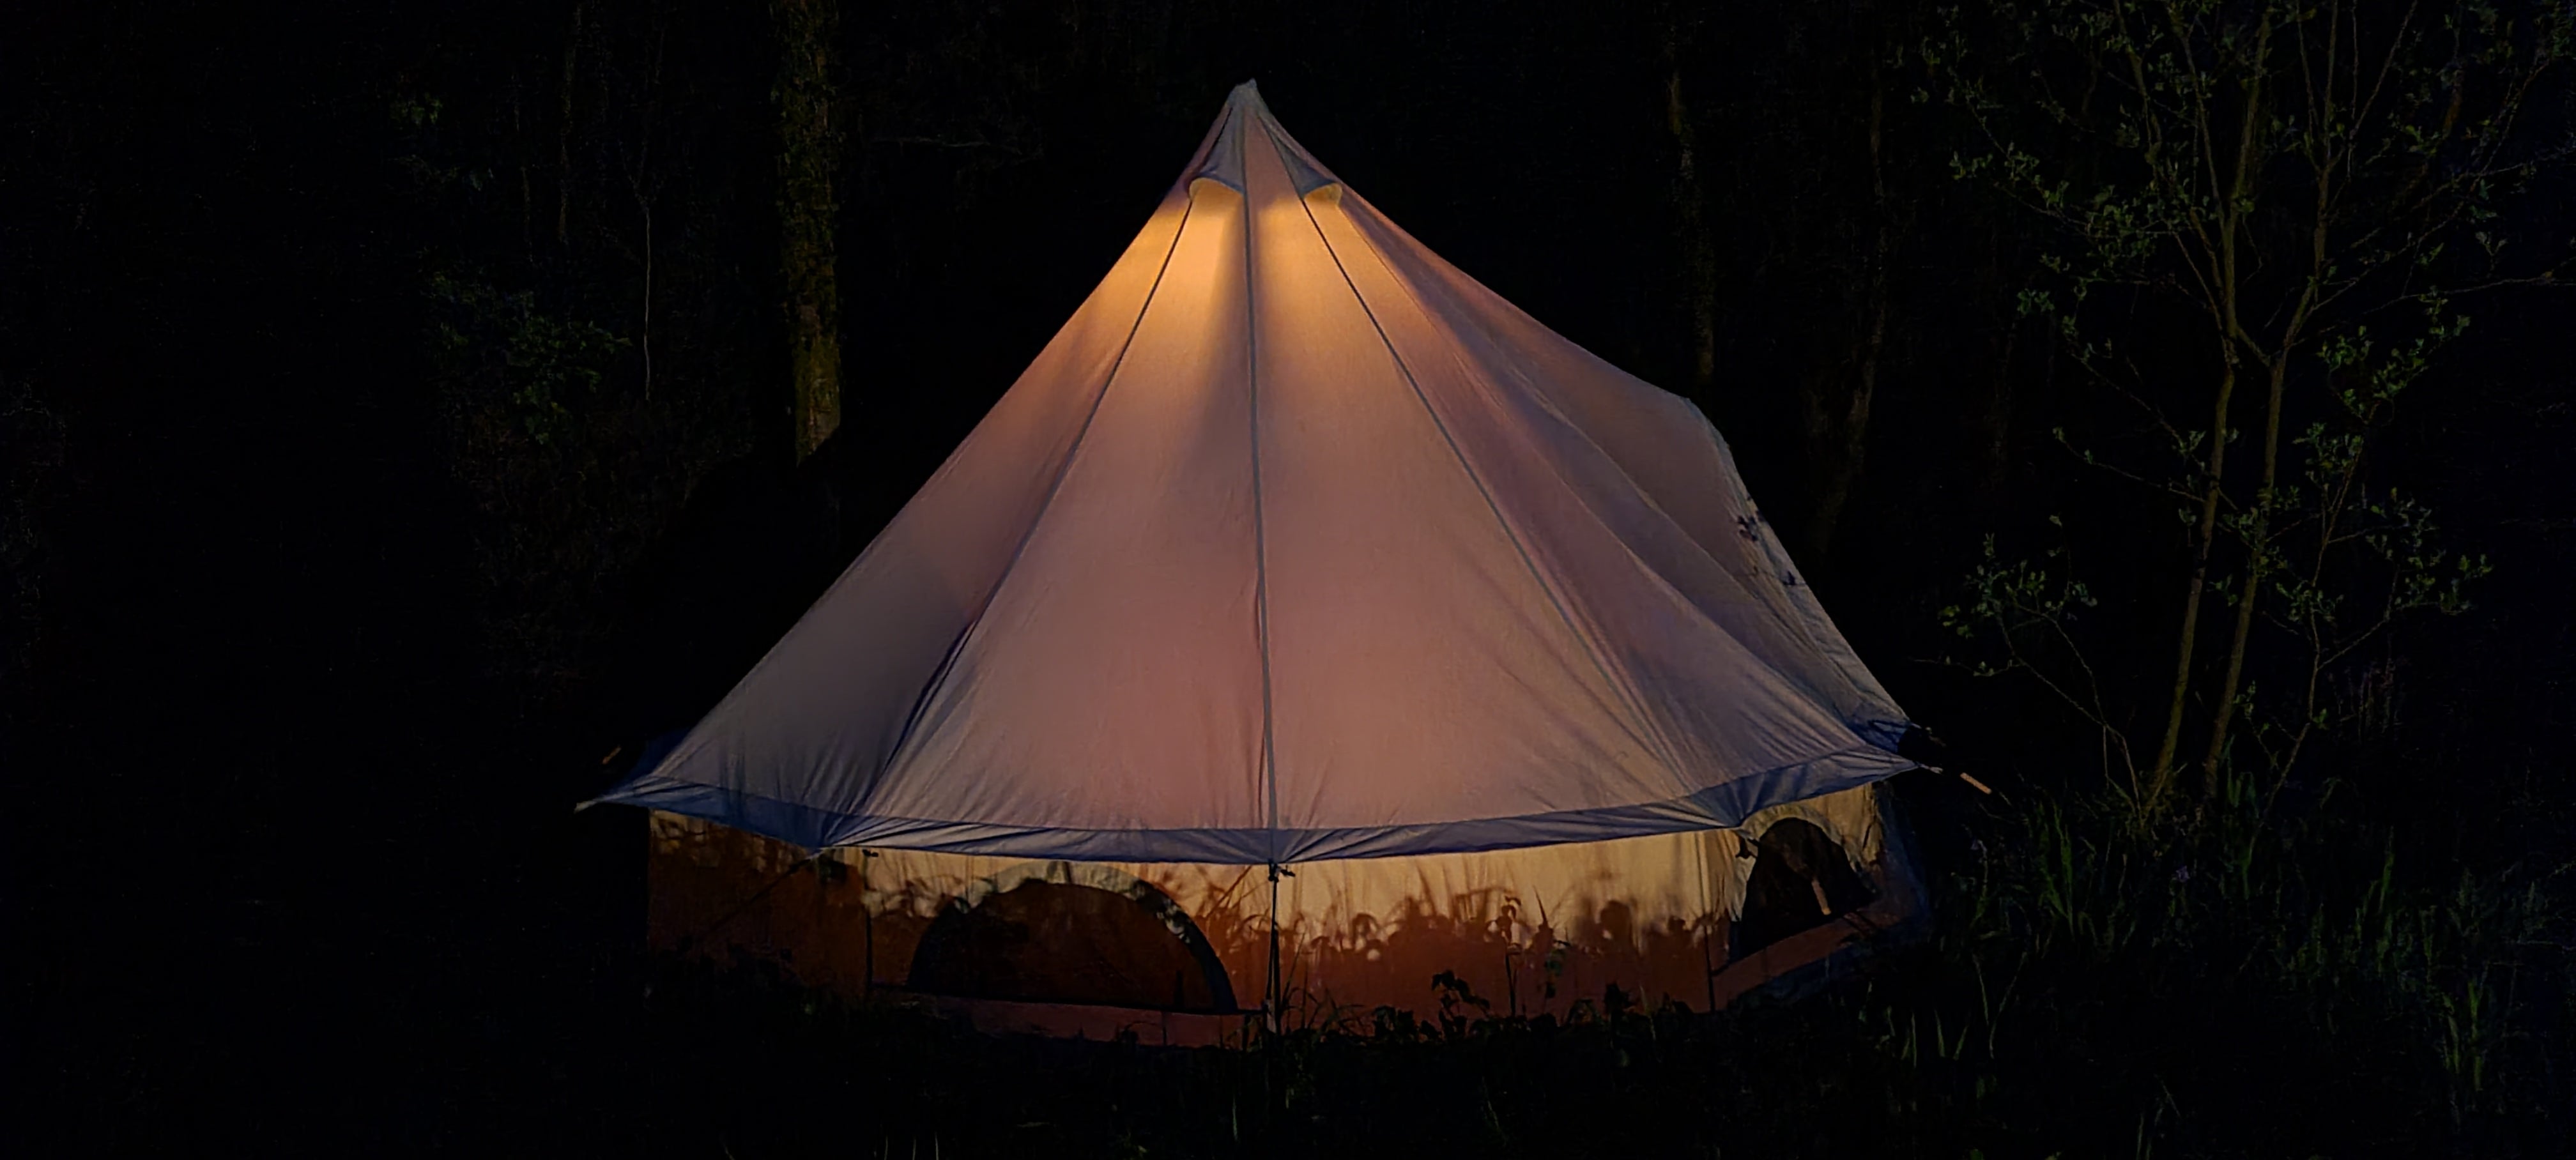 BTV 3 - Water Resistant & Fire Retardant Premium Luxury Canvas Bell Tent With Stove Hole